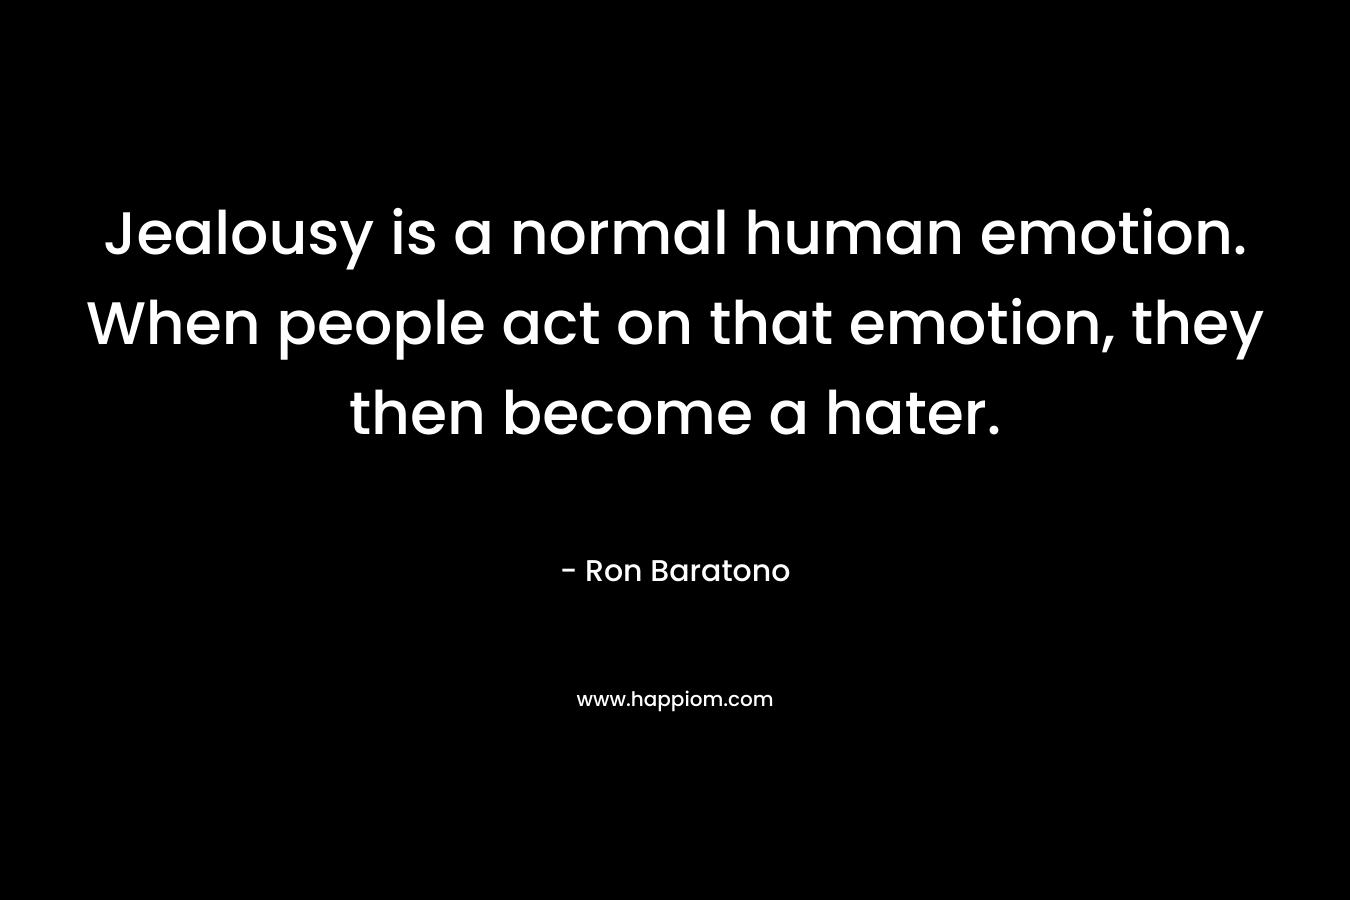 Jealousy is a normal human emotion. When people act on that emotion, they then become a hater. – Ron Baratono